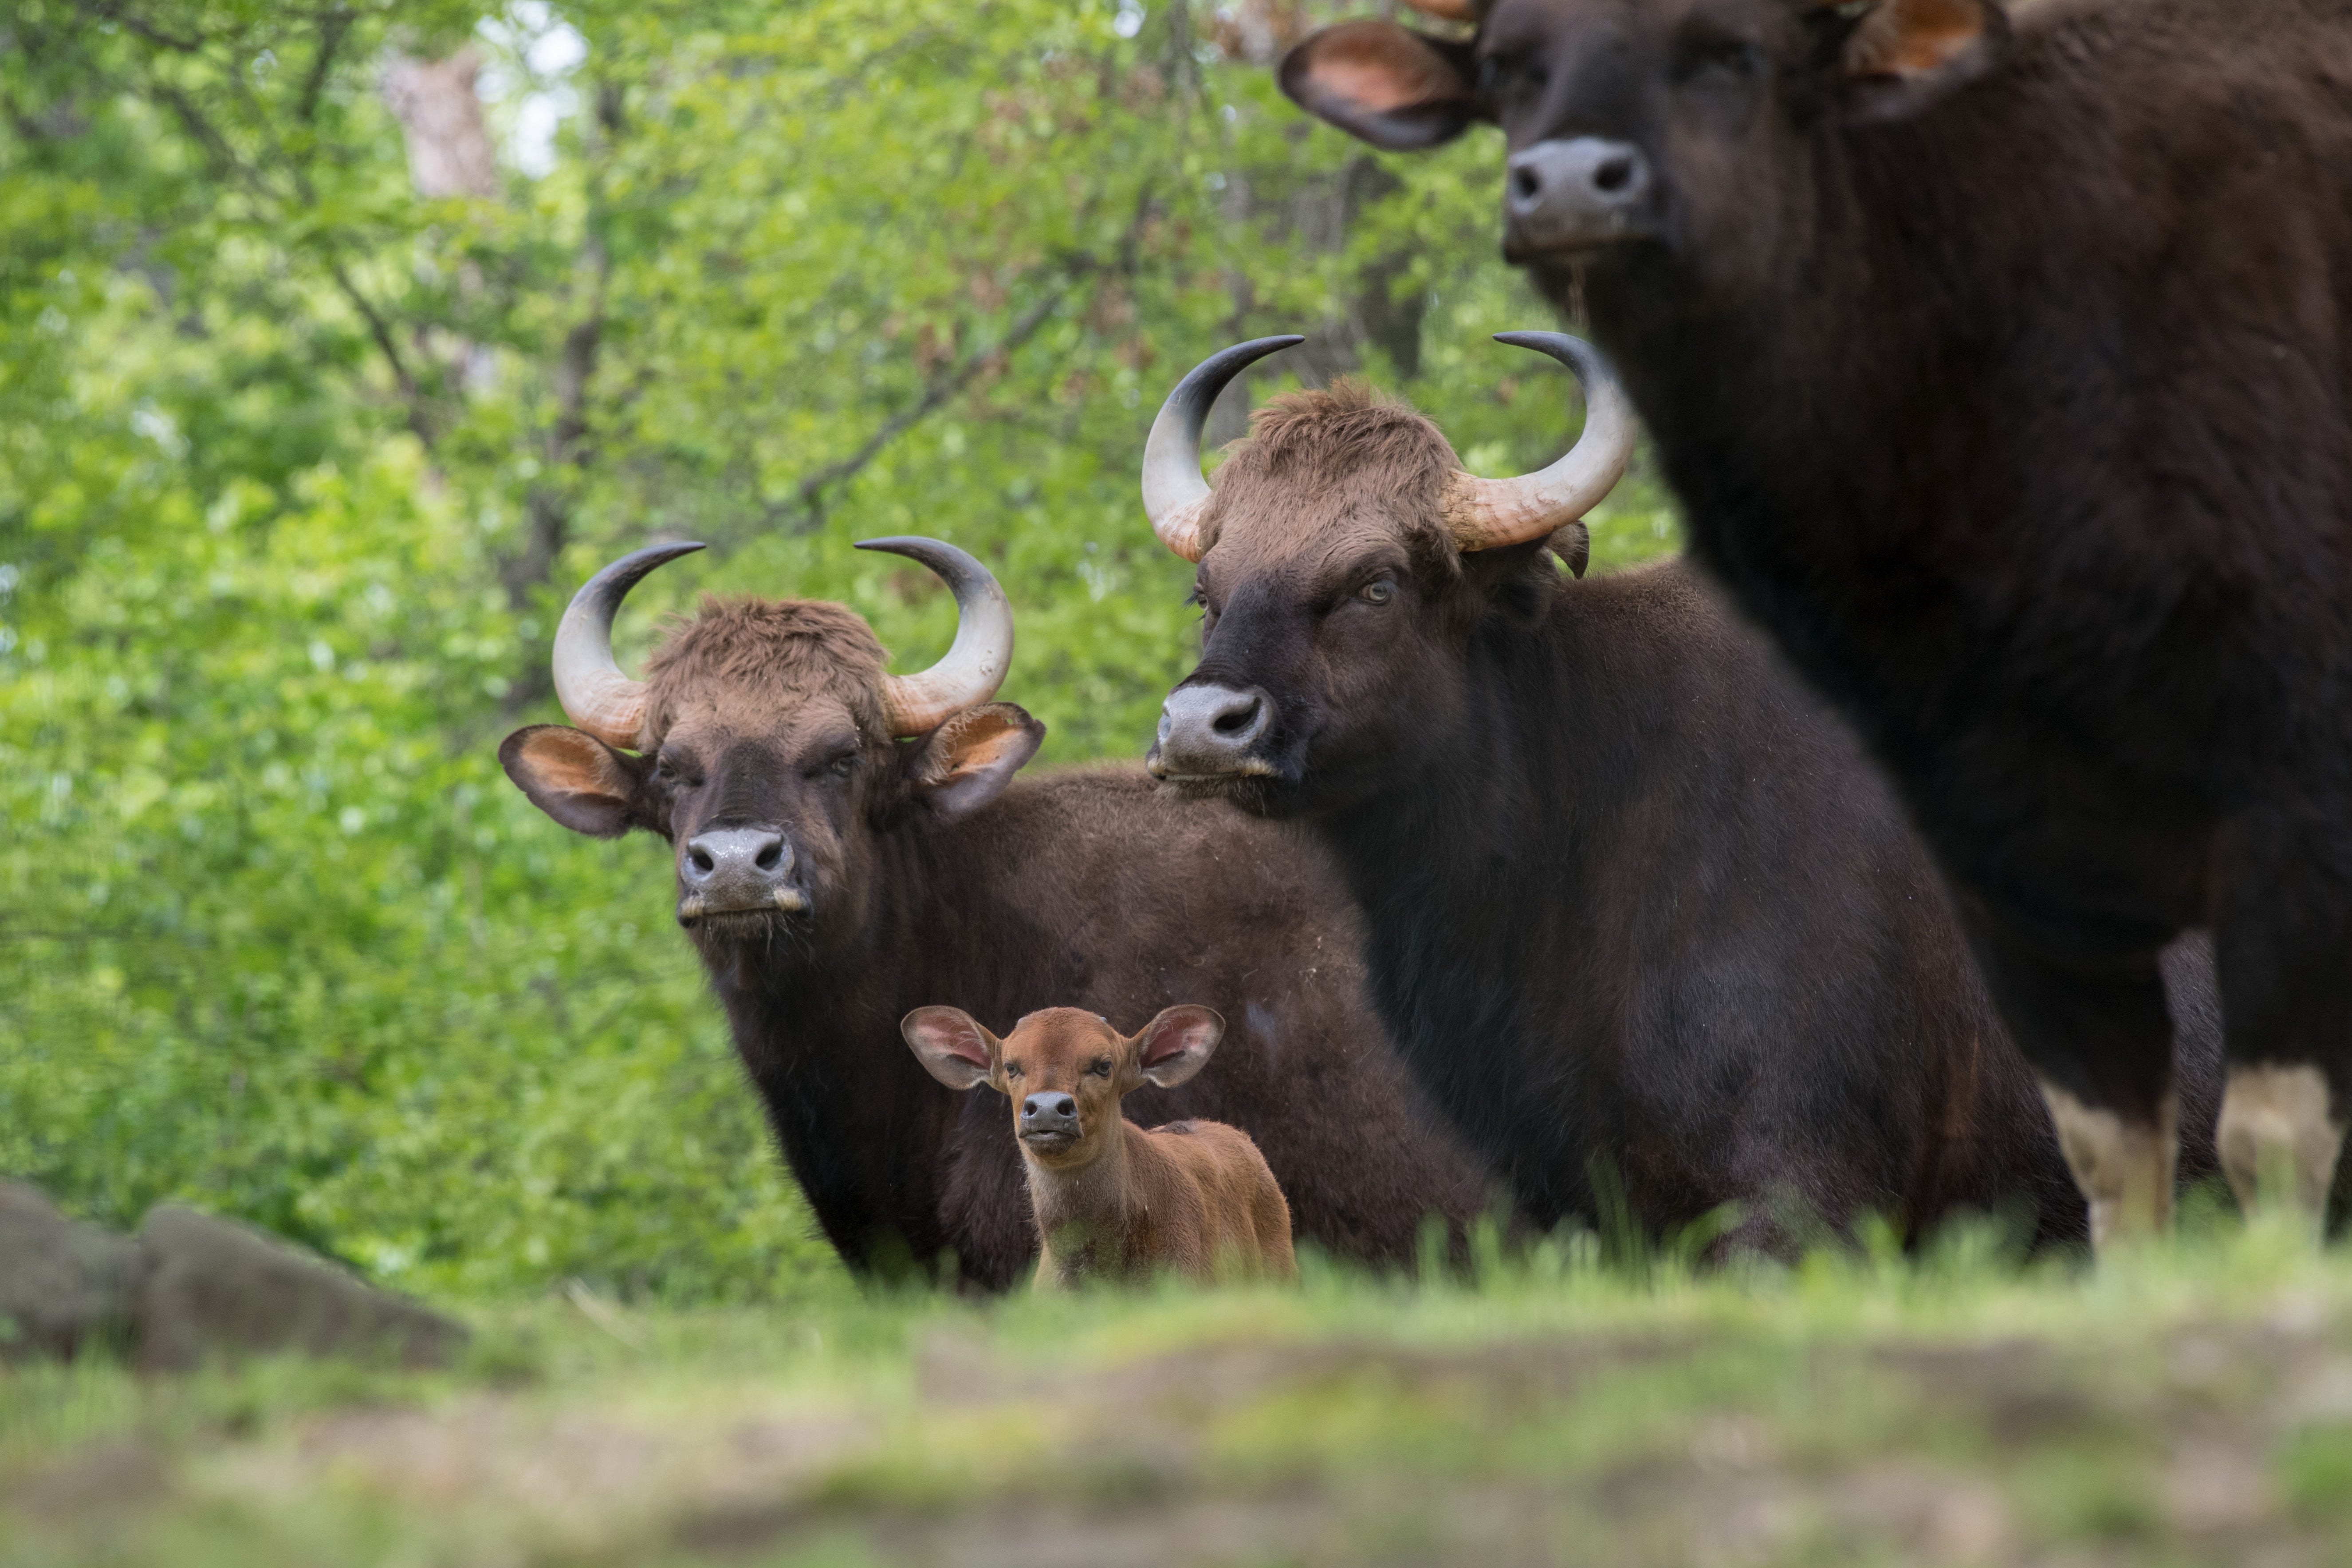 Gaur are the world’s largest wild cattle. This species can be seen along with many other Asian animals from the Bronx Zoo’s Wild Asia Monorail, which takes riders through more than 40 acres of Asian-themed exhibits.